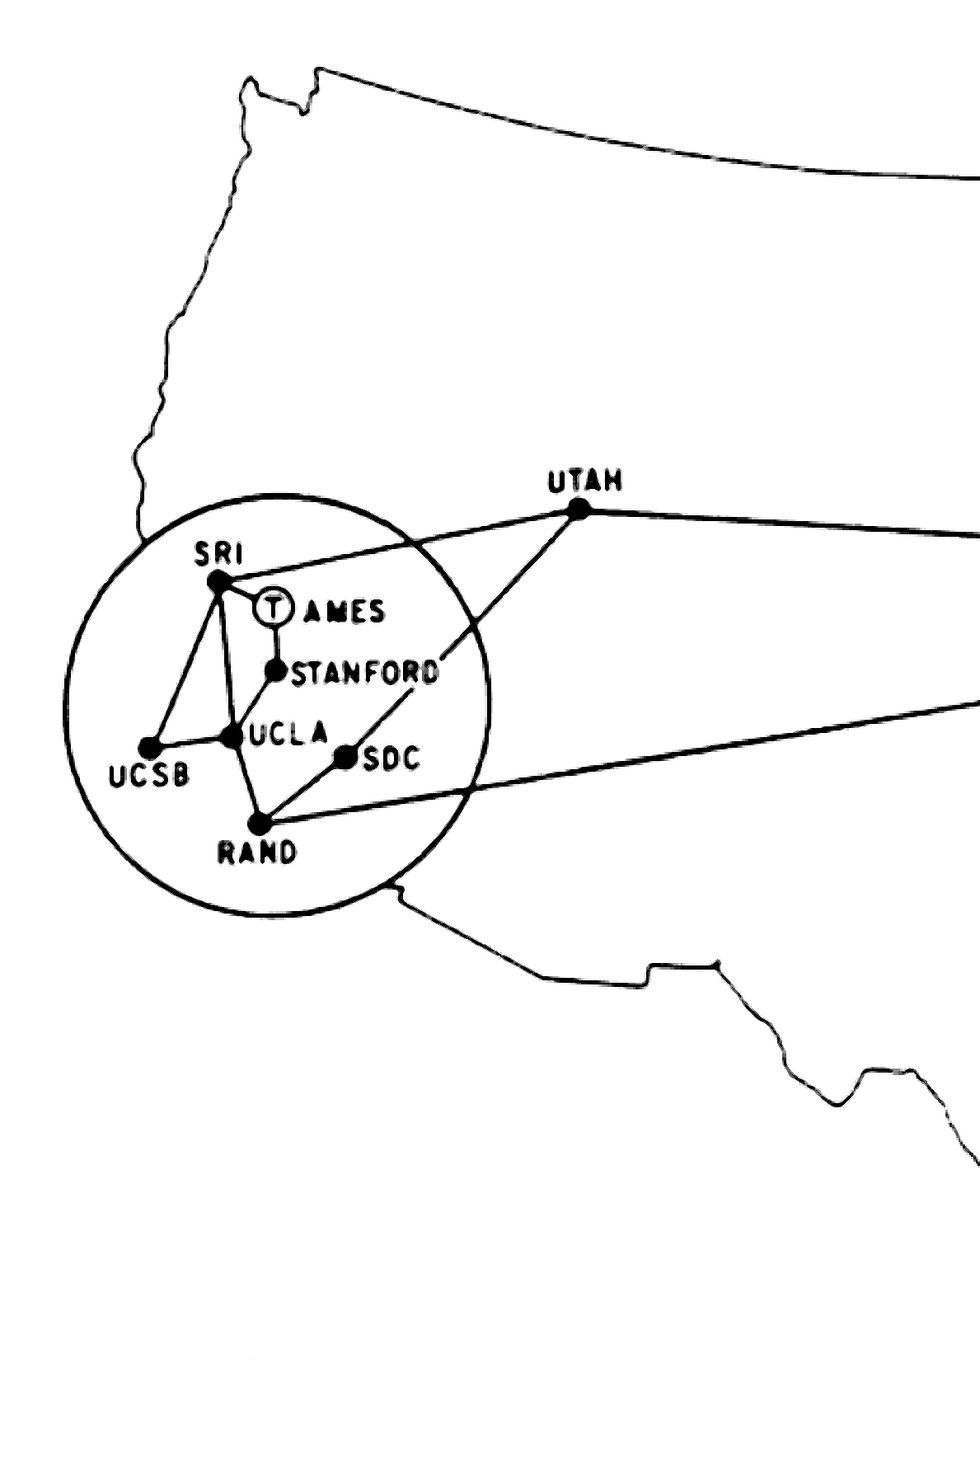 Map from 1972 showing the communication centers and relays (nodes) of new communication systems ARPANET (Advanced Research Projects Agency, U.S. Department of Defense, the predecessor of the internet). Network ARPANET (predecessor of the Internet which de